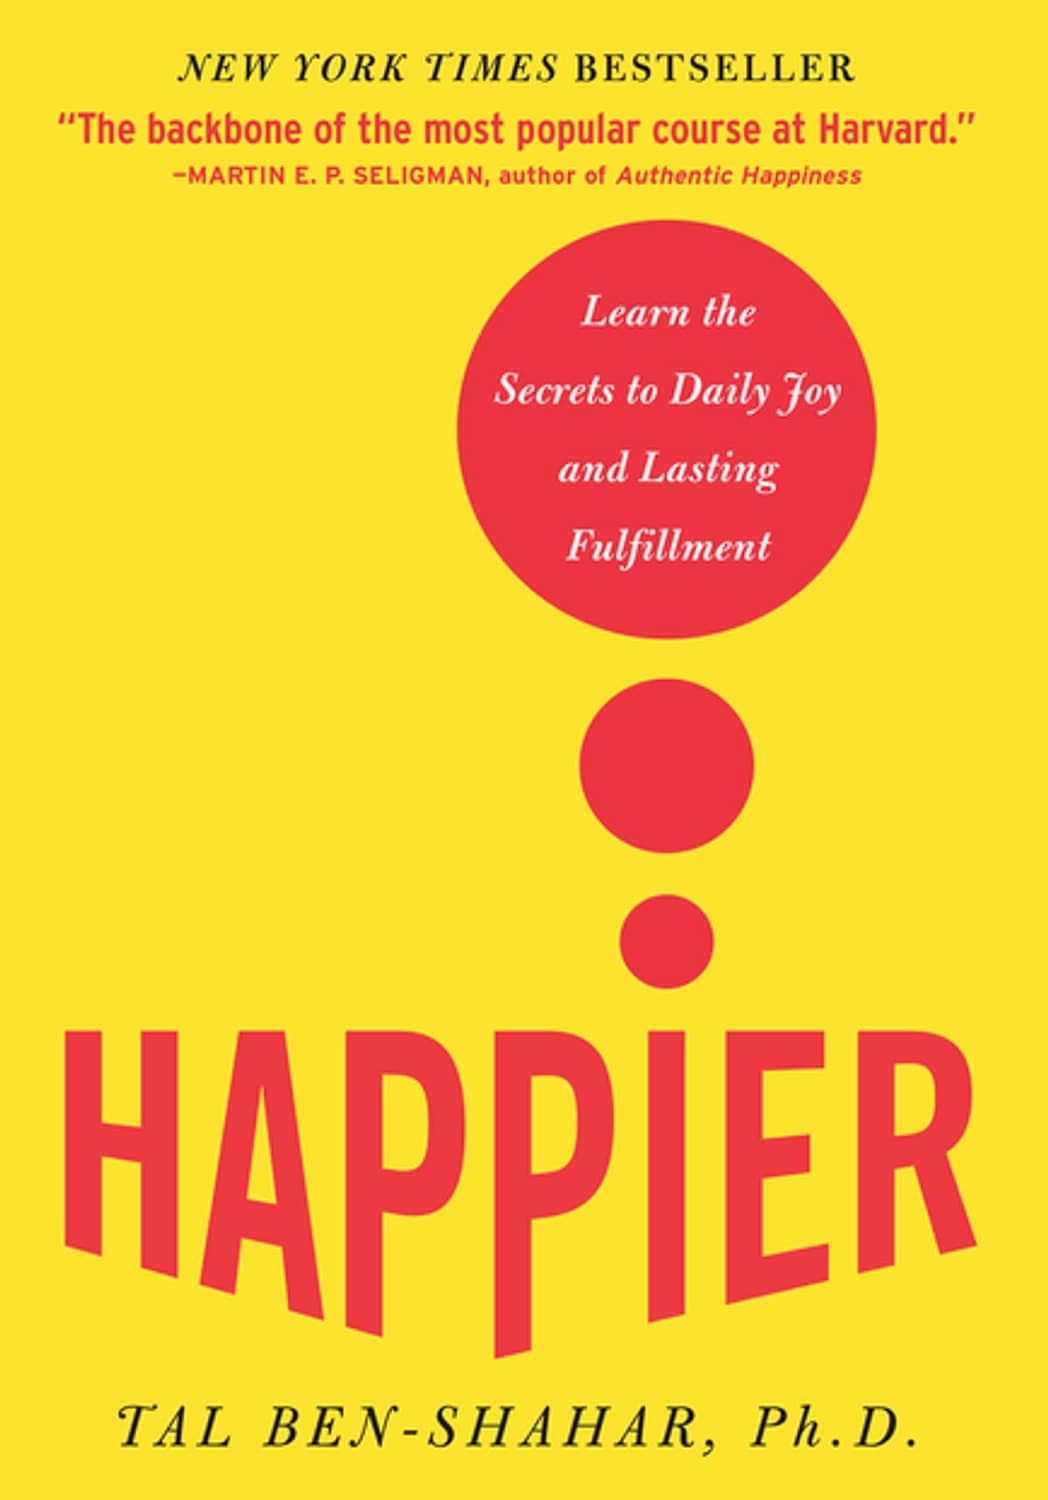 Is happiness a choice? This book tells you the secret.